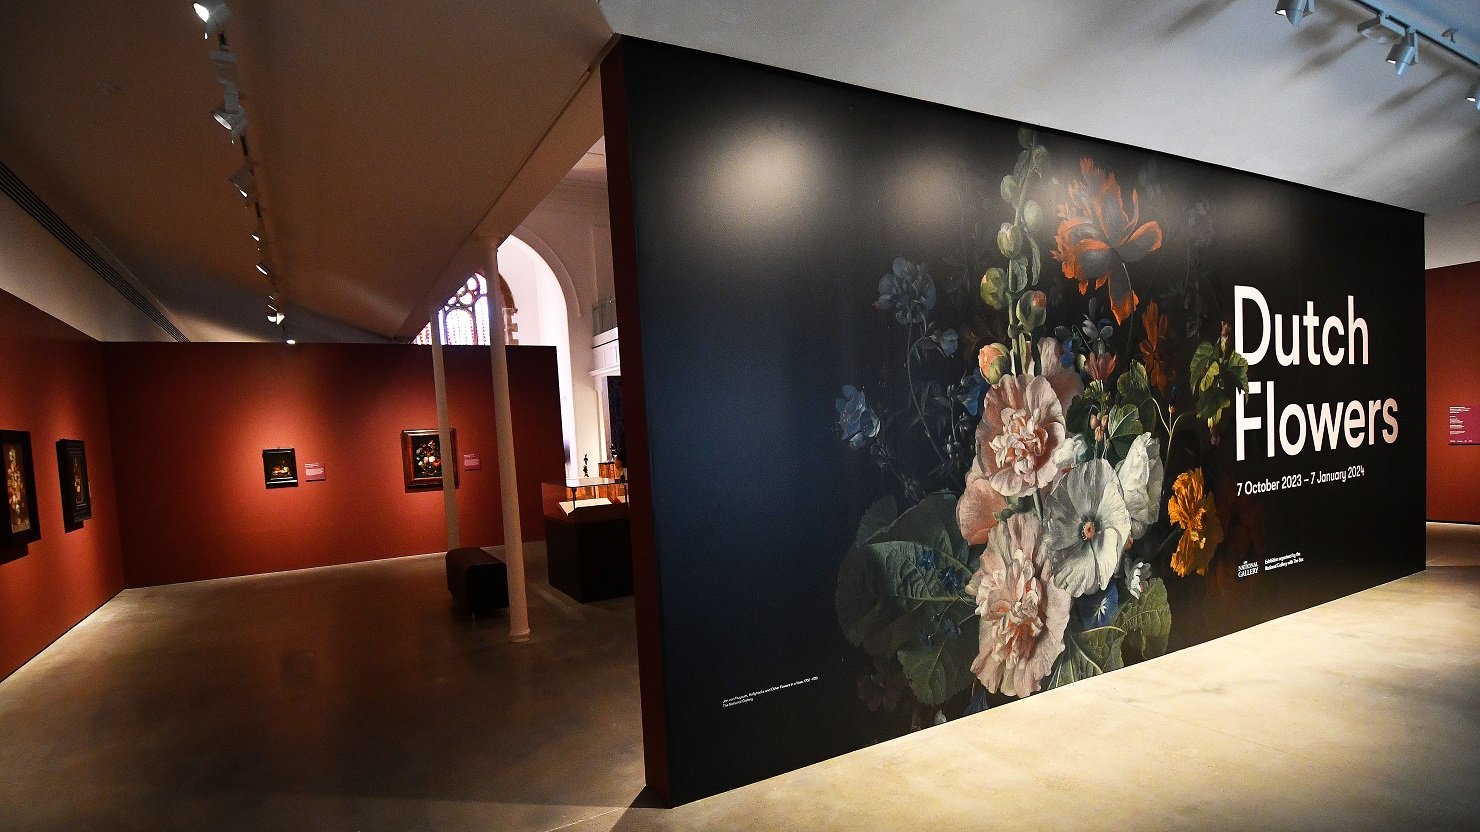 Masters of their craft: van Walscapelle, de Bray and Ruysch | The Box Plymouth